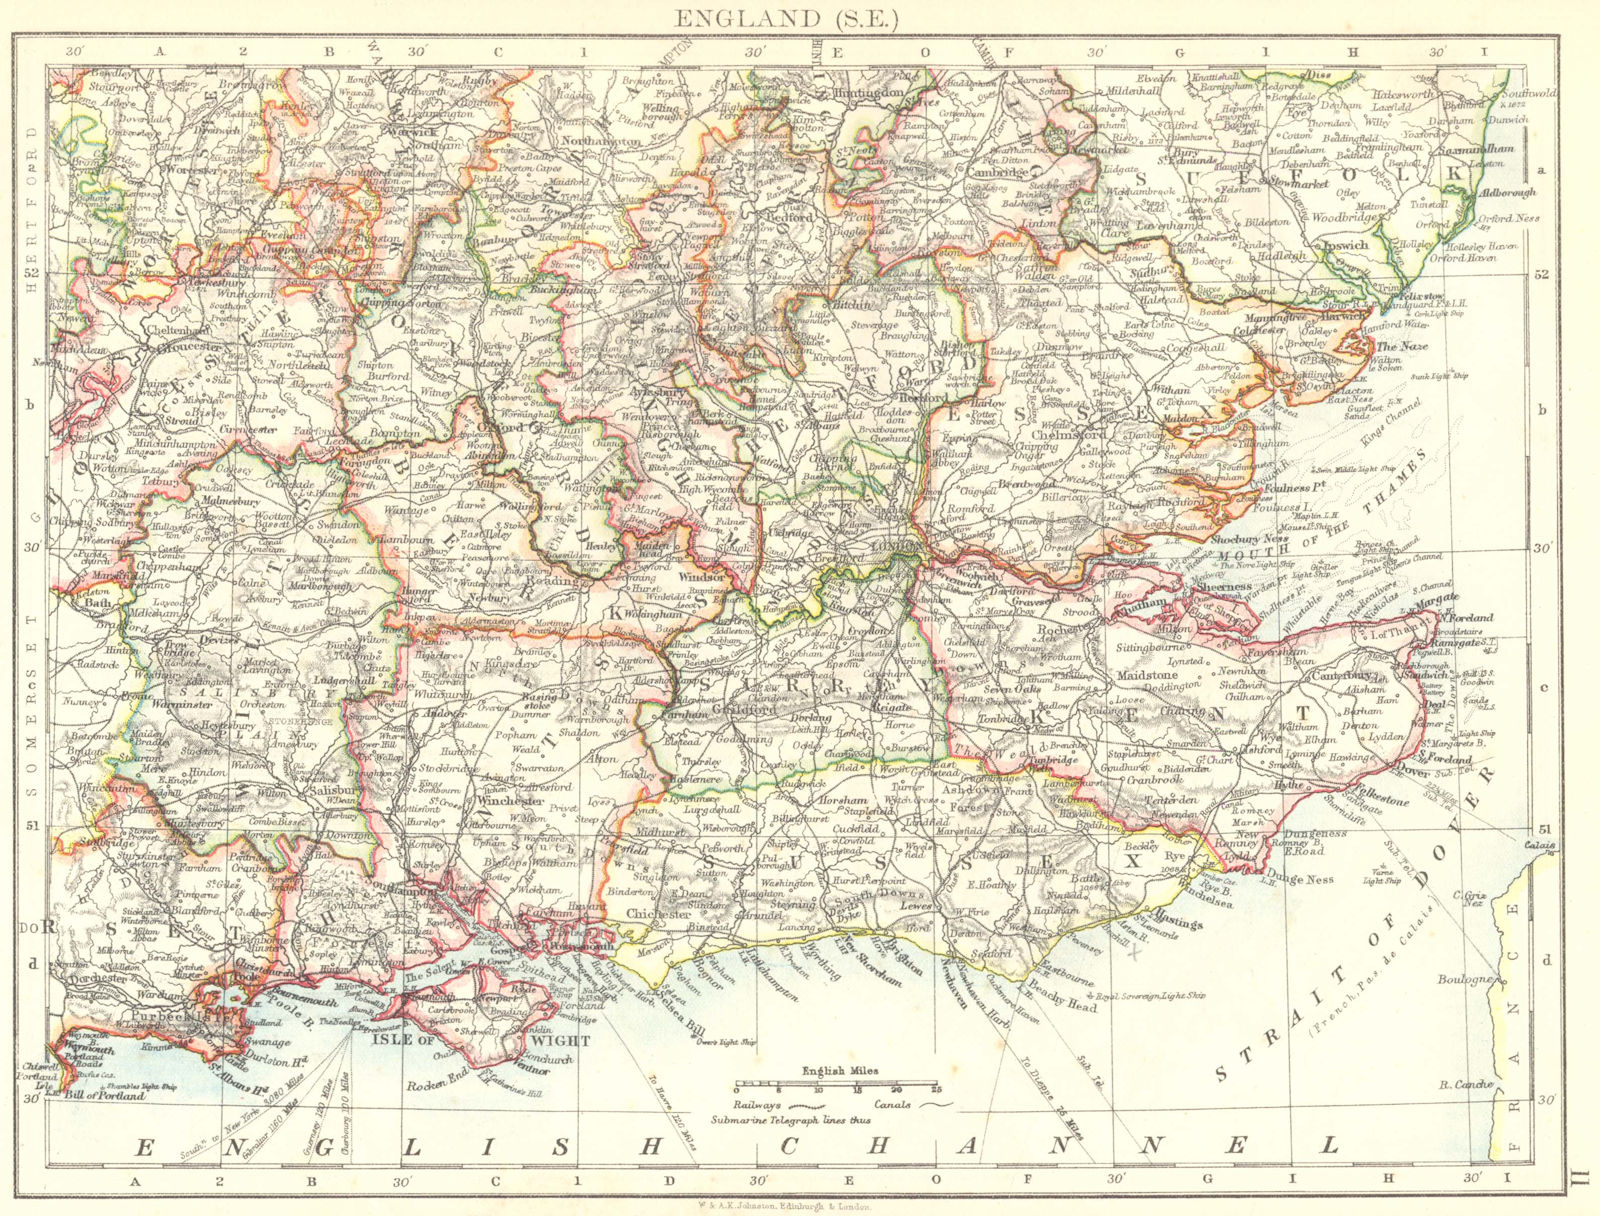 SOUTH EAST ENGLAND. Home counties. Thames valley & estuary. JOHNSTON 1899 map